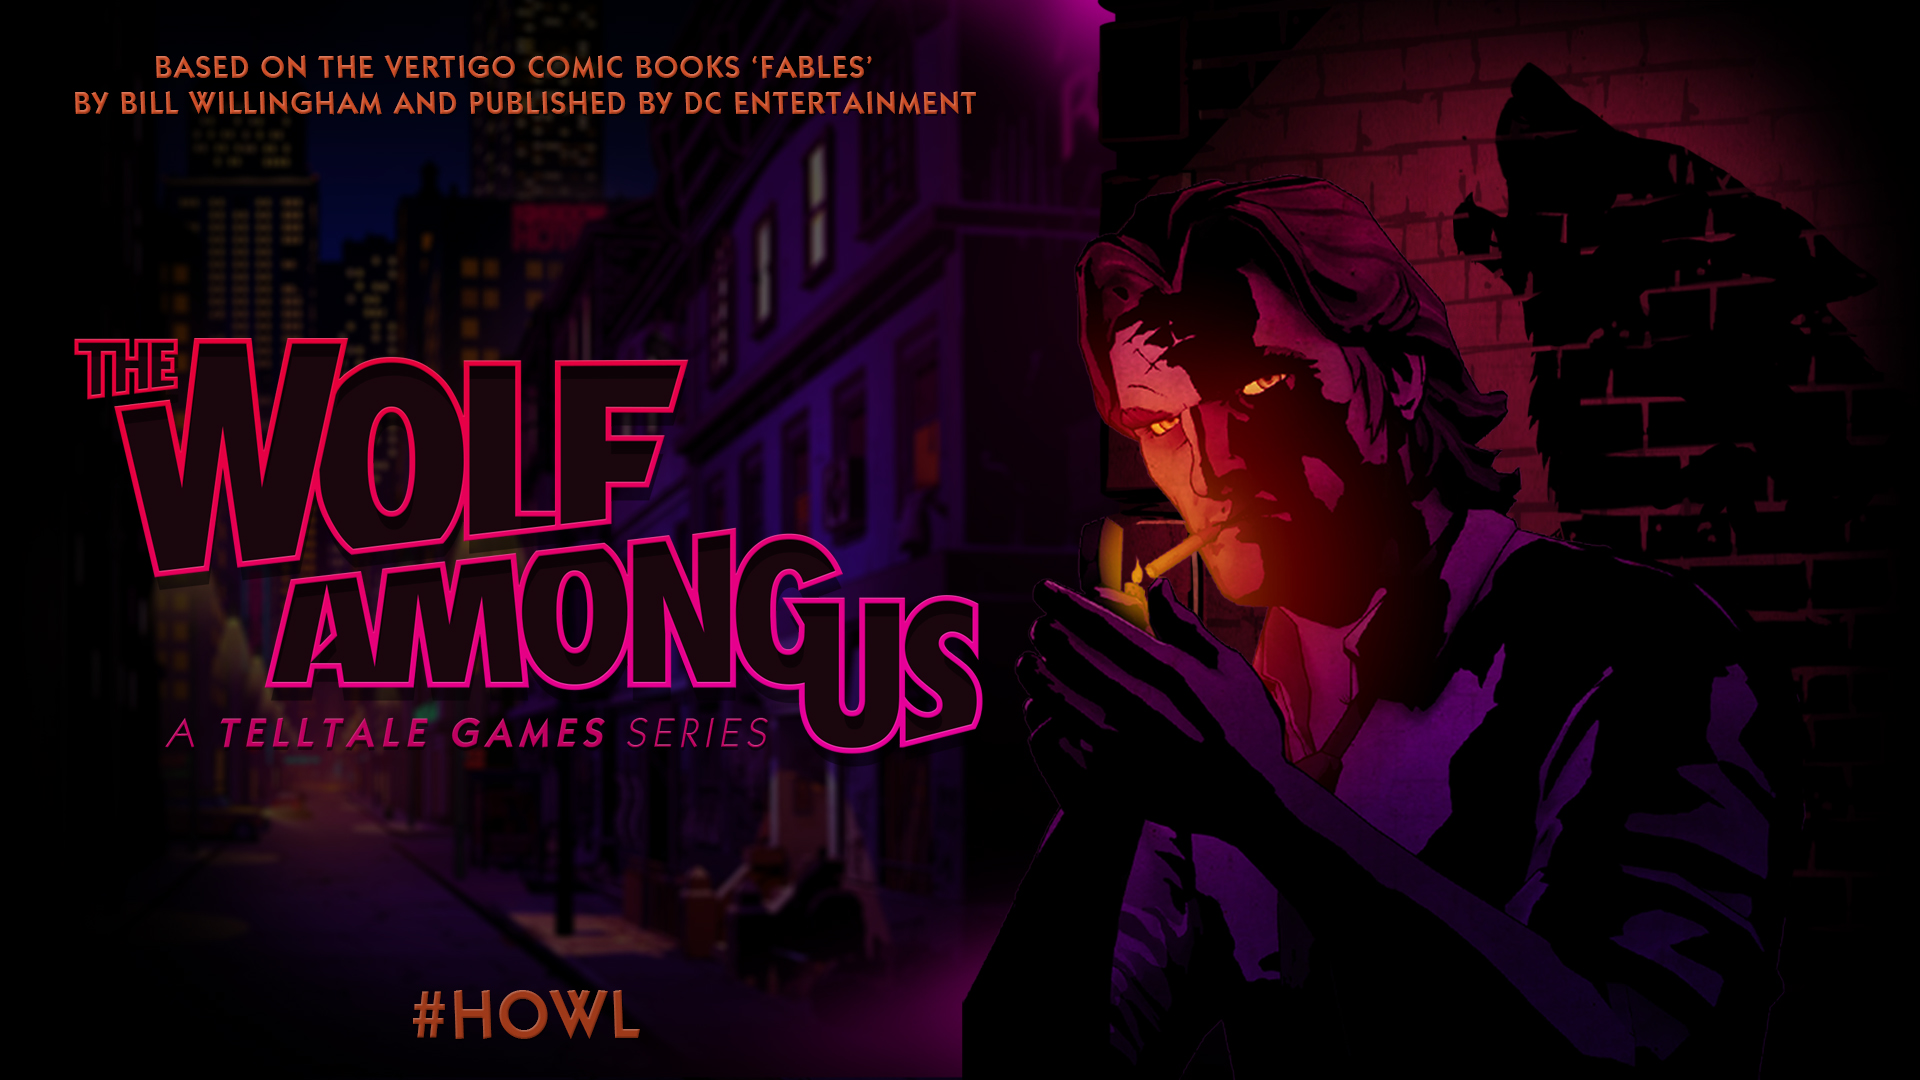 Trailer for The Wolf Among Us